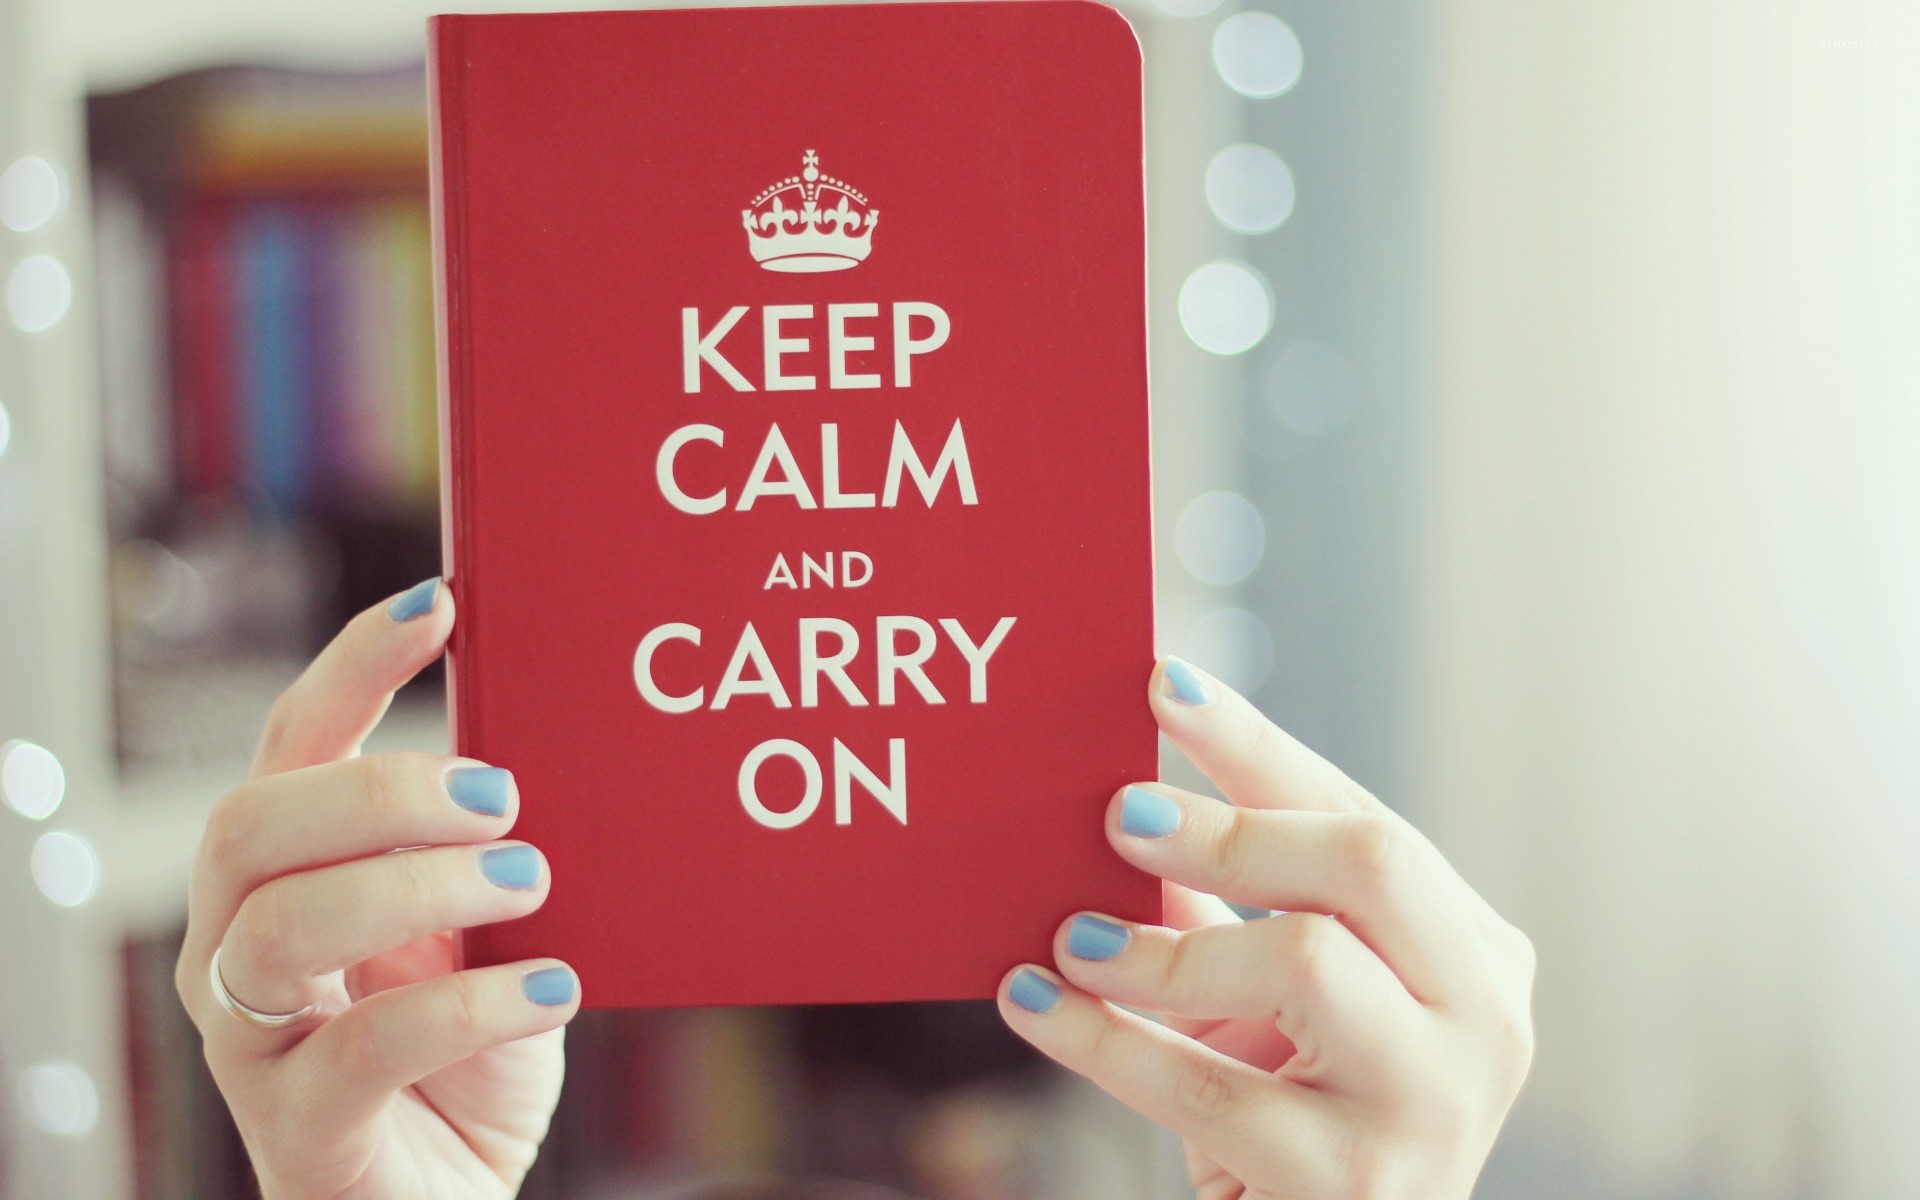 keep calm and carry on clapping